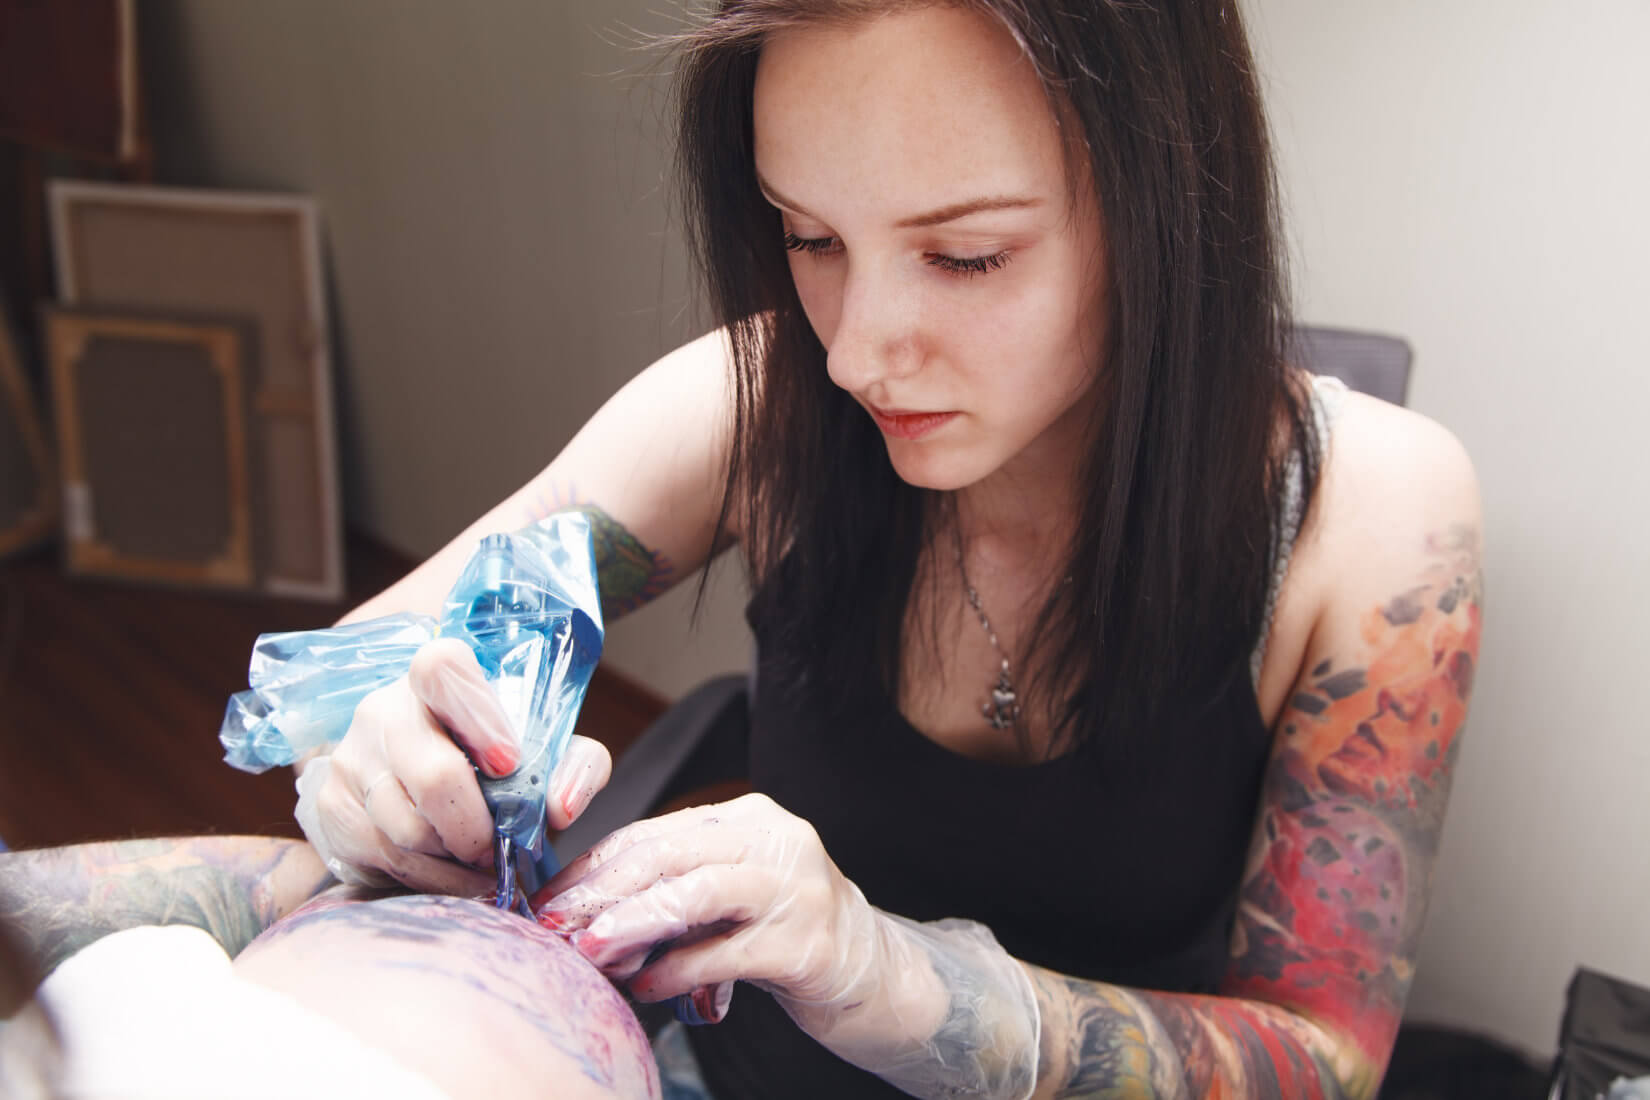 Infection control & first aid training courses suitable for tattooists and body piercing studio staff.